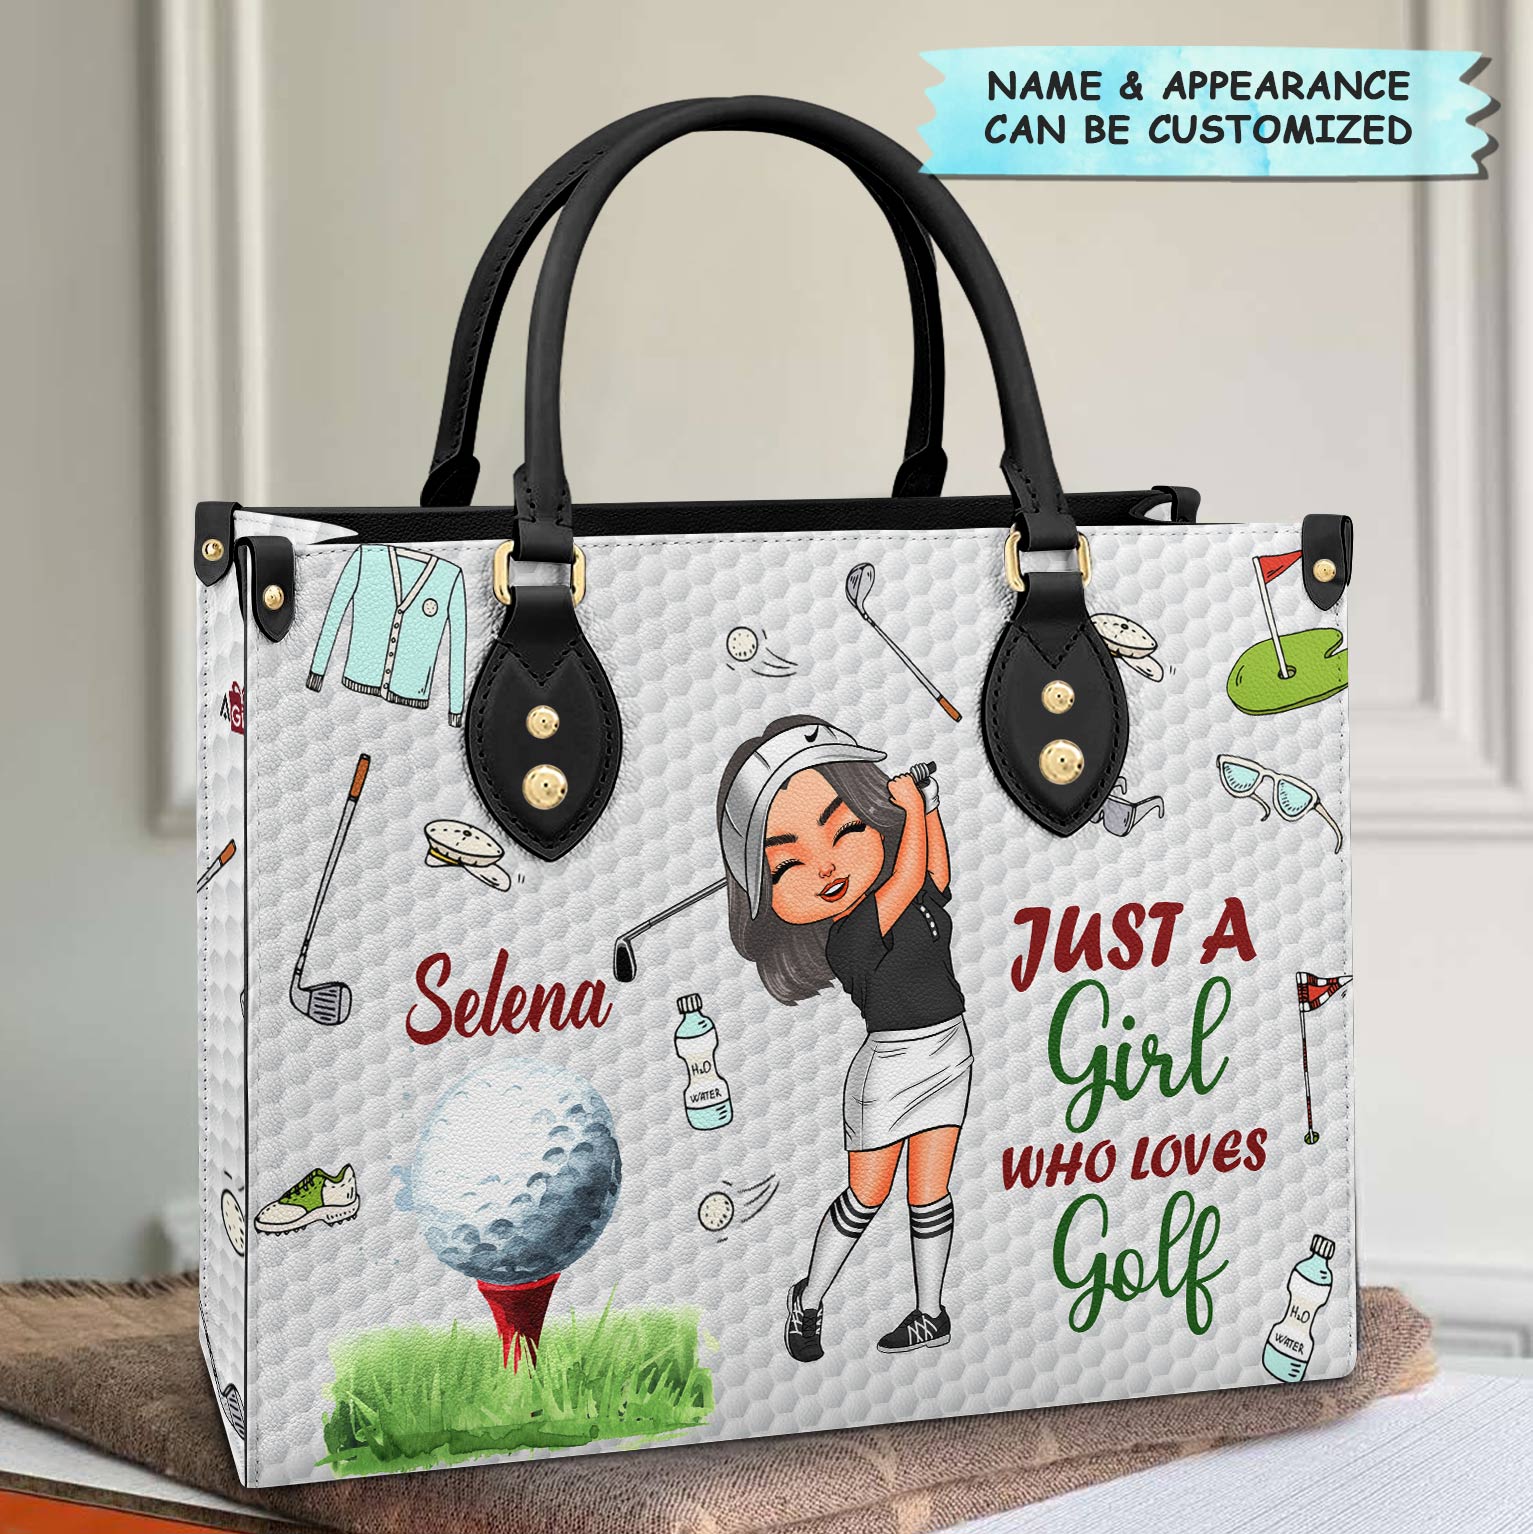 Personalized Leather Bag - Gift For Golf Lovers - Just A Girl Who Loves Golf